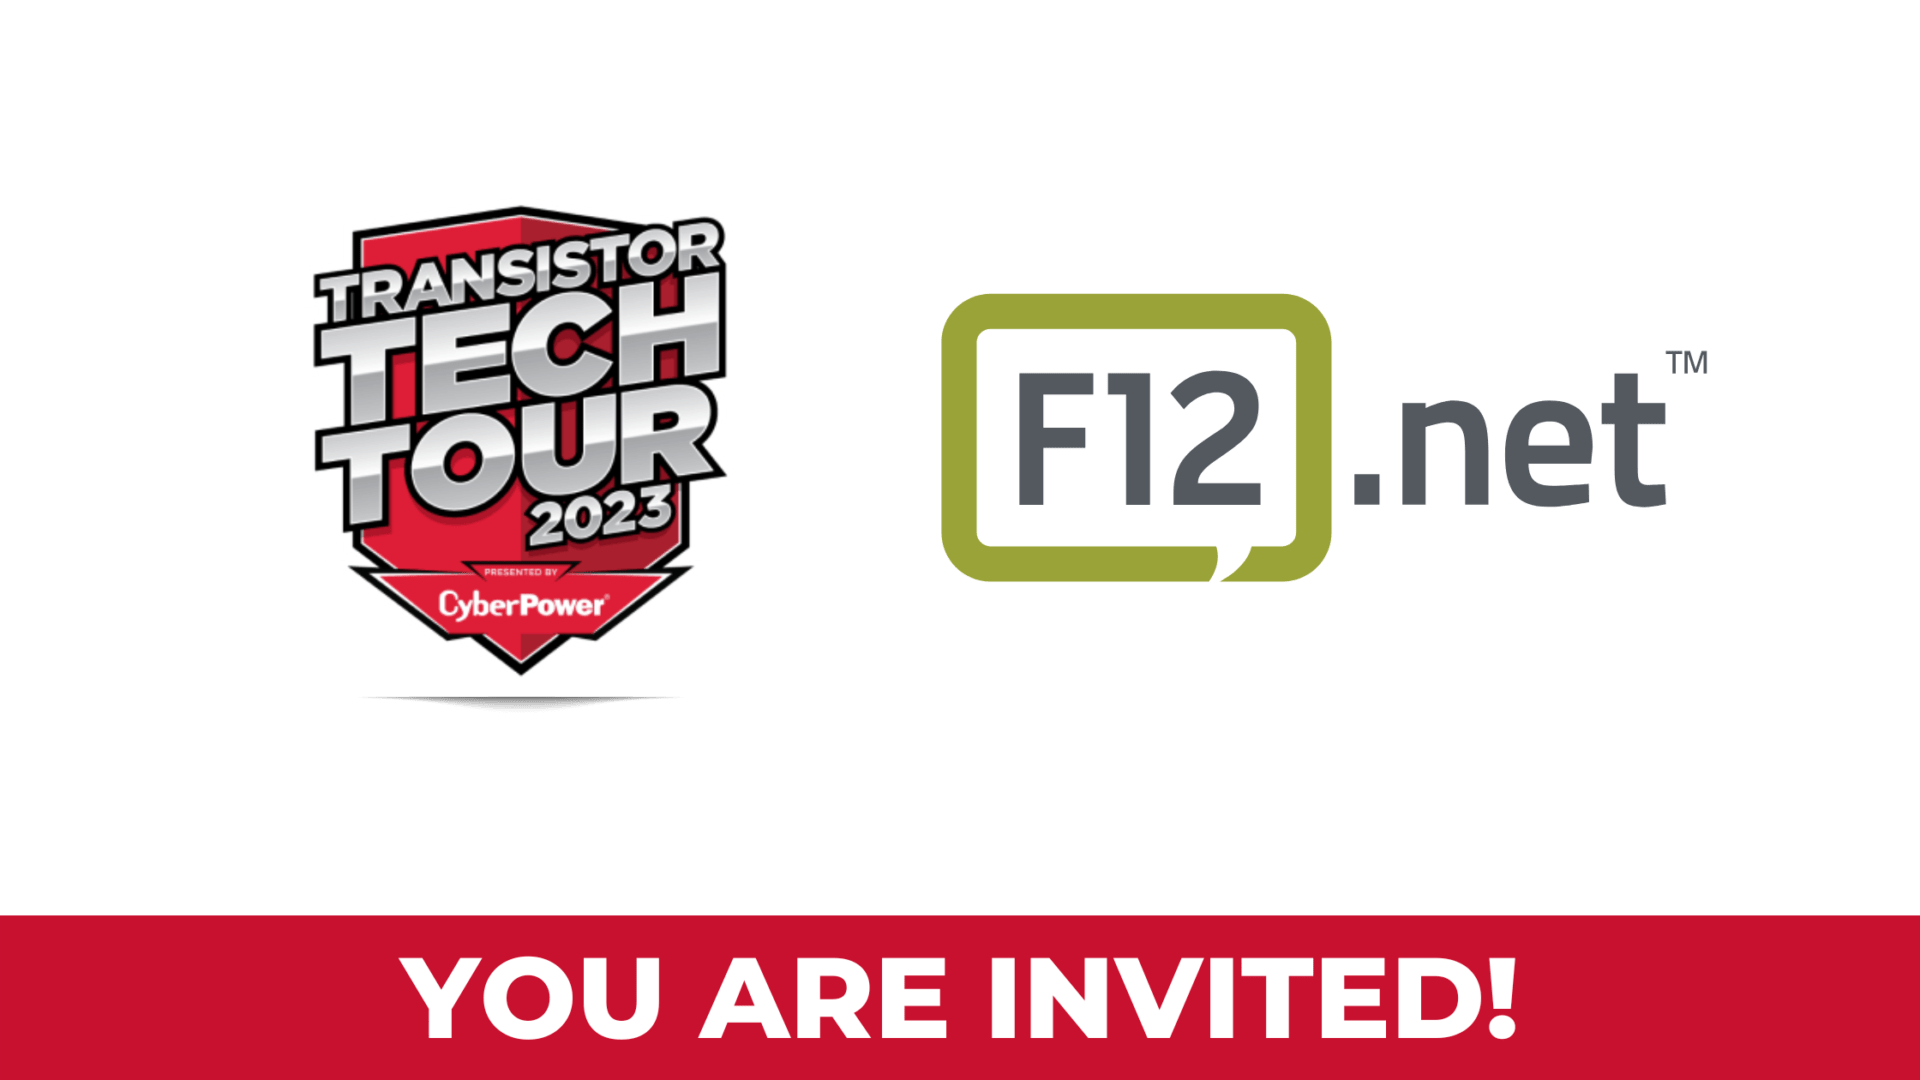 Transistor Tech Tour and F12.net Banner